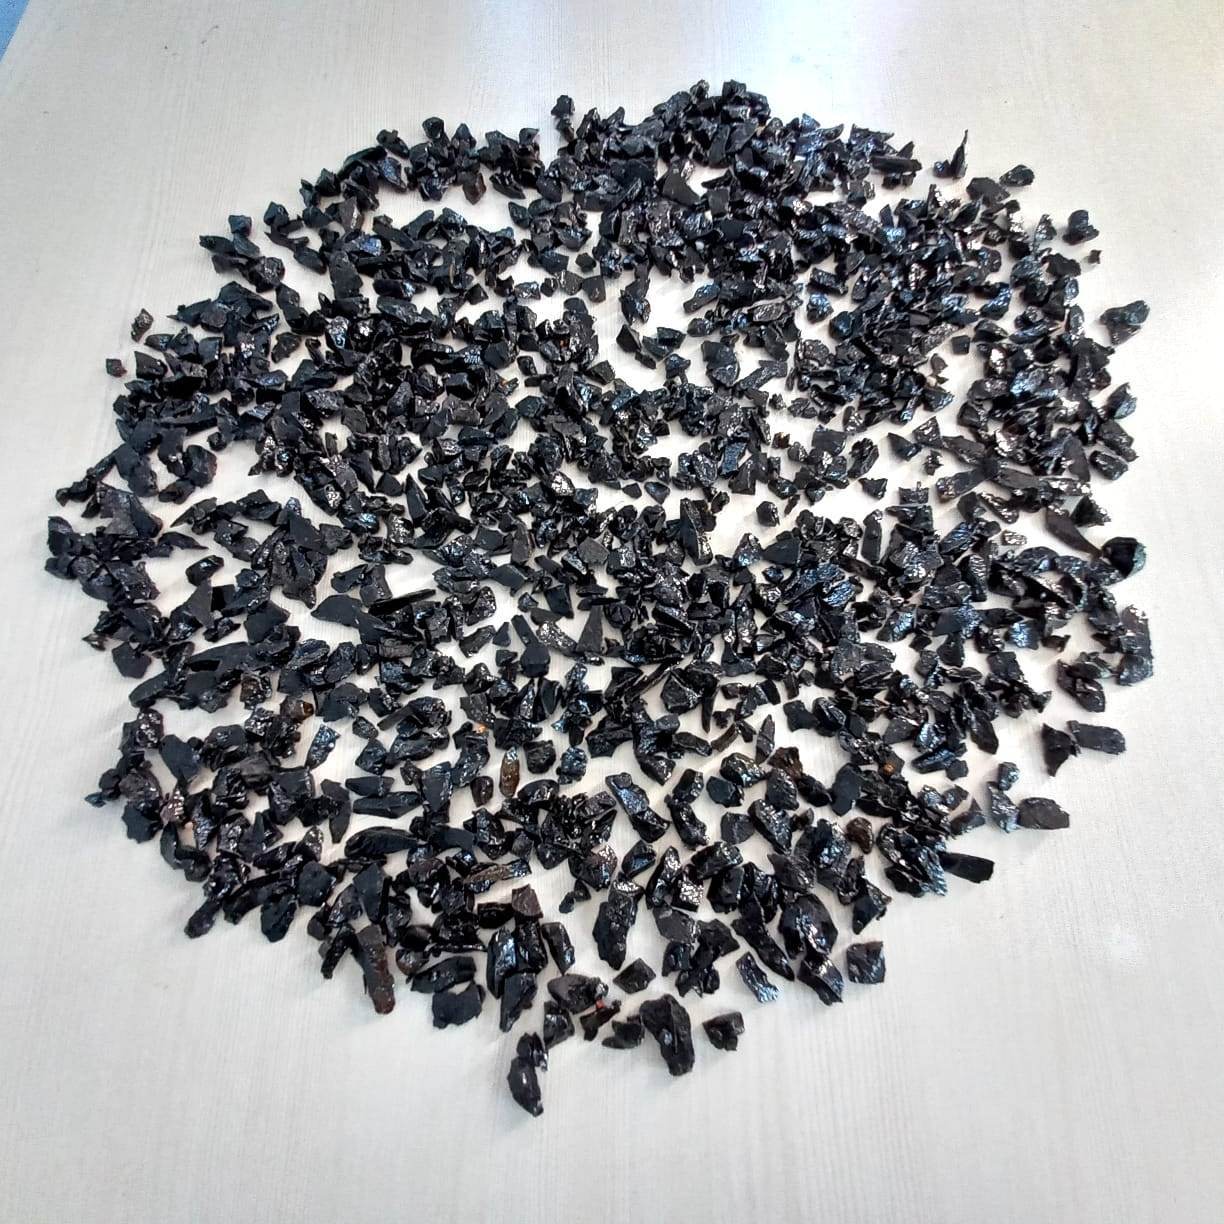 Polyurethane polished Black Natural Crushed Marble Chips for landscaping decoration used commercial construction